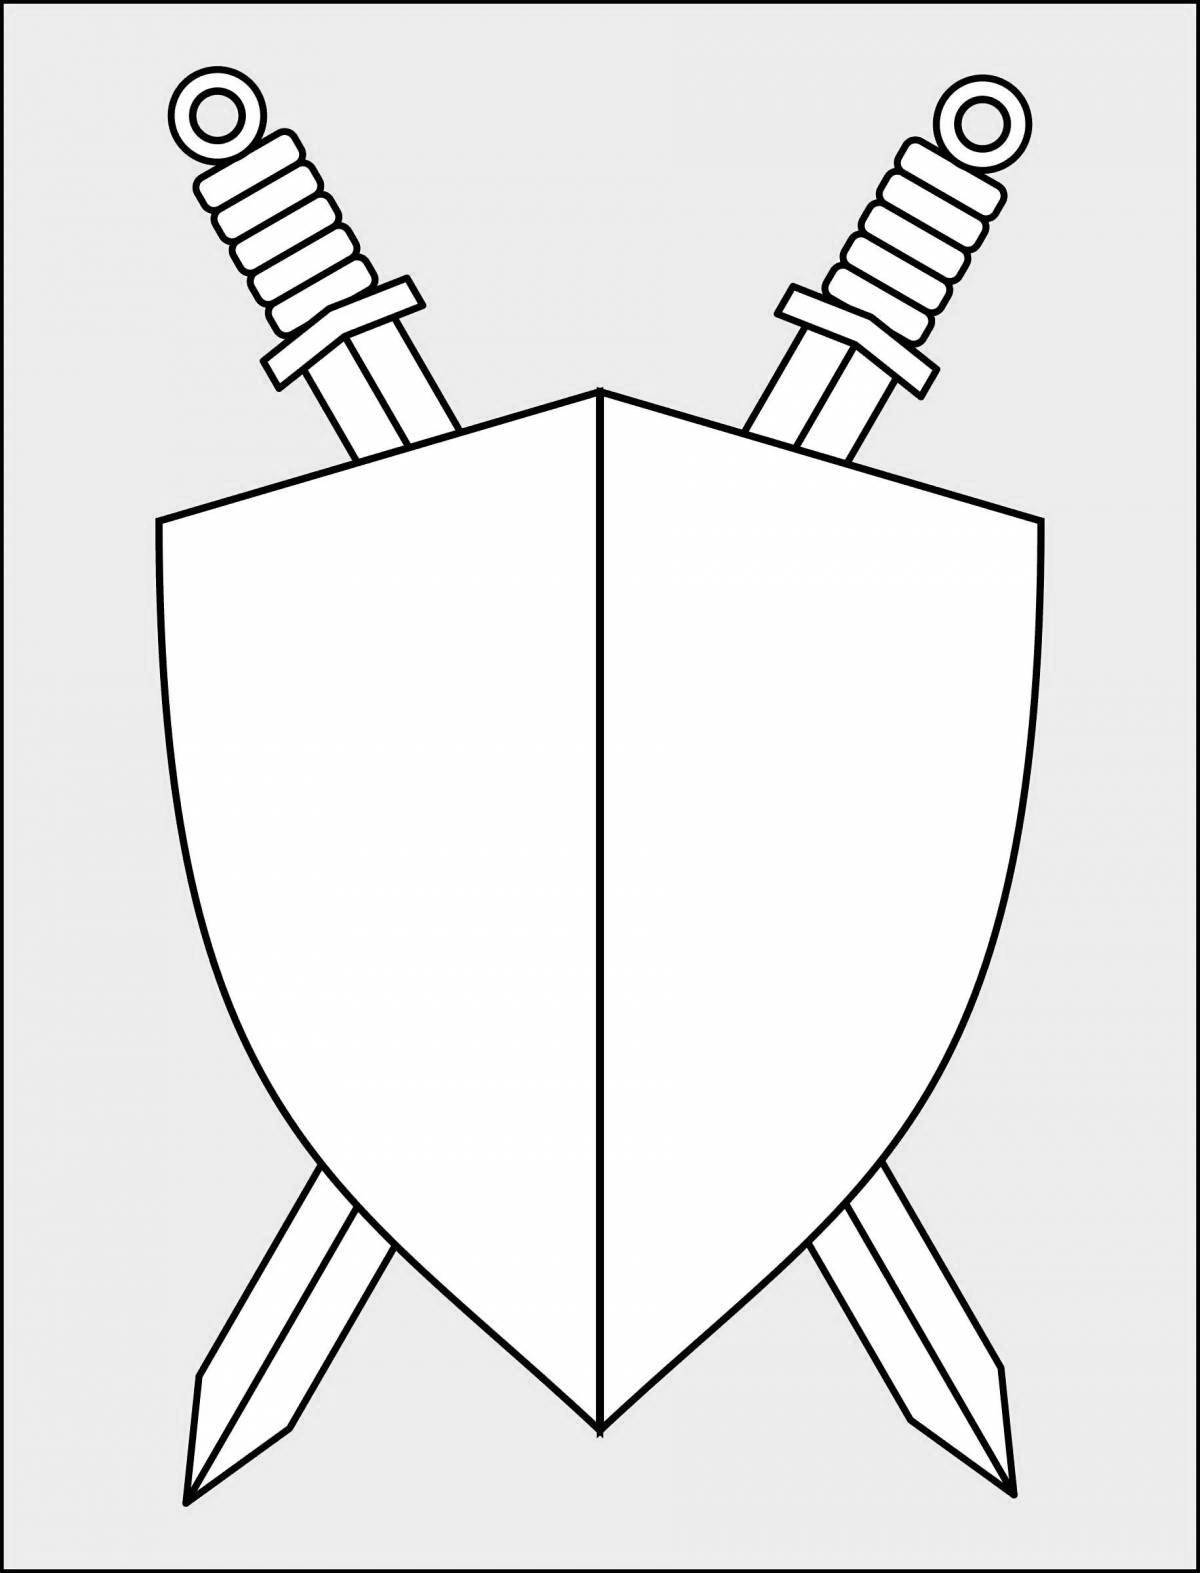 Fancy shield and sword coloring page